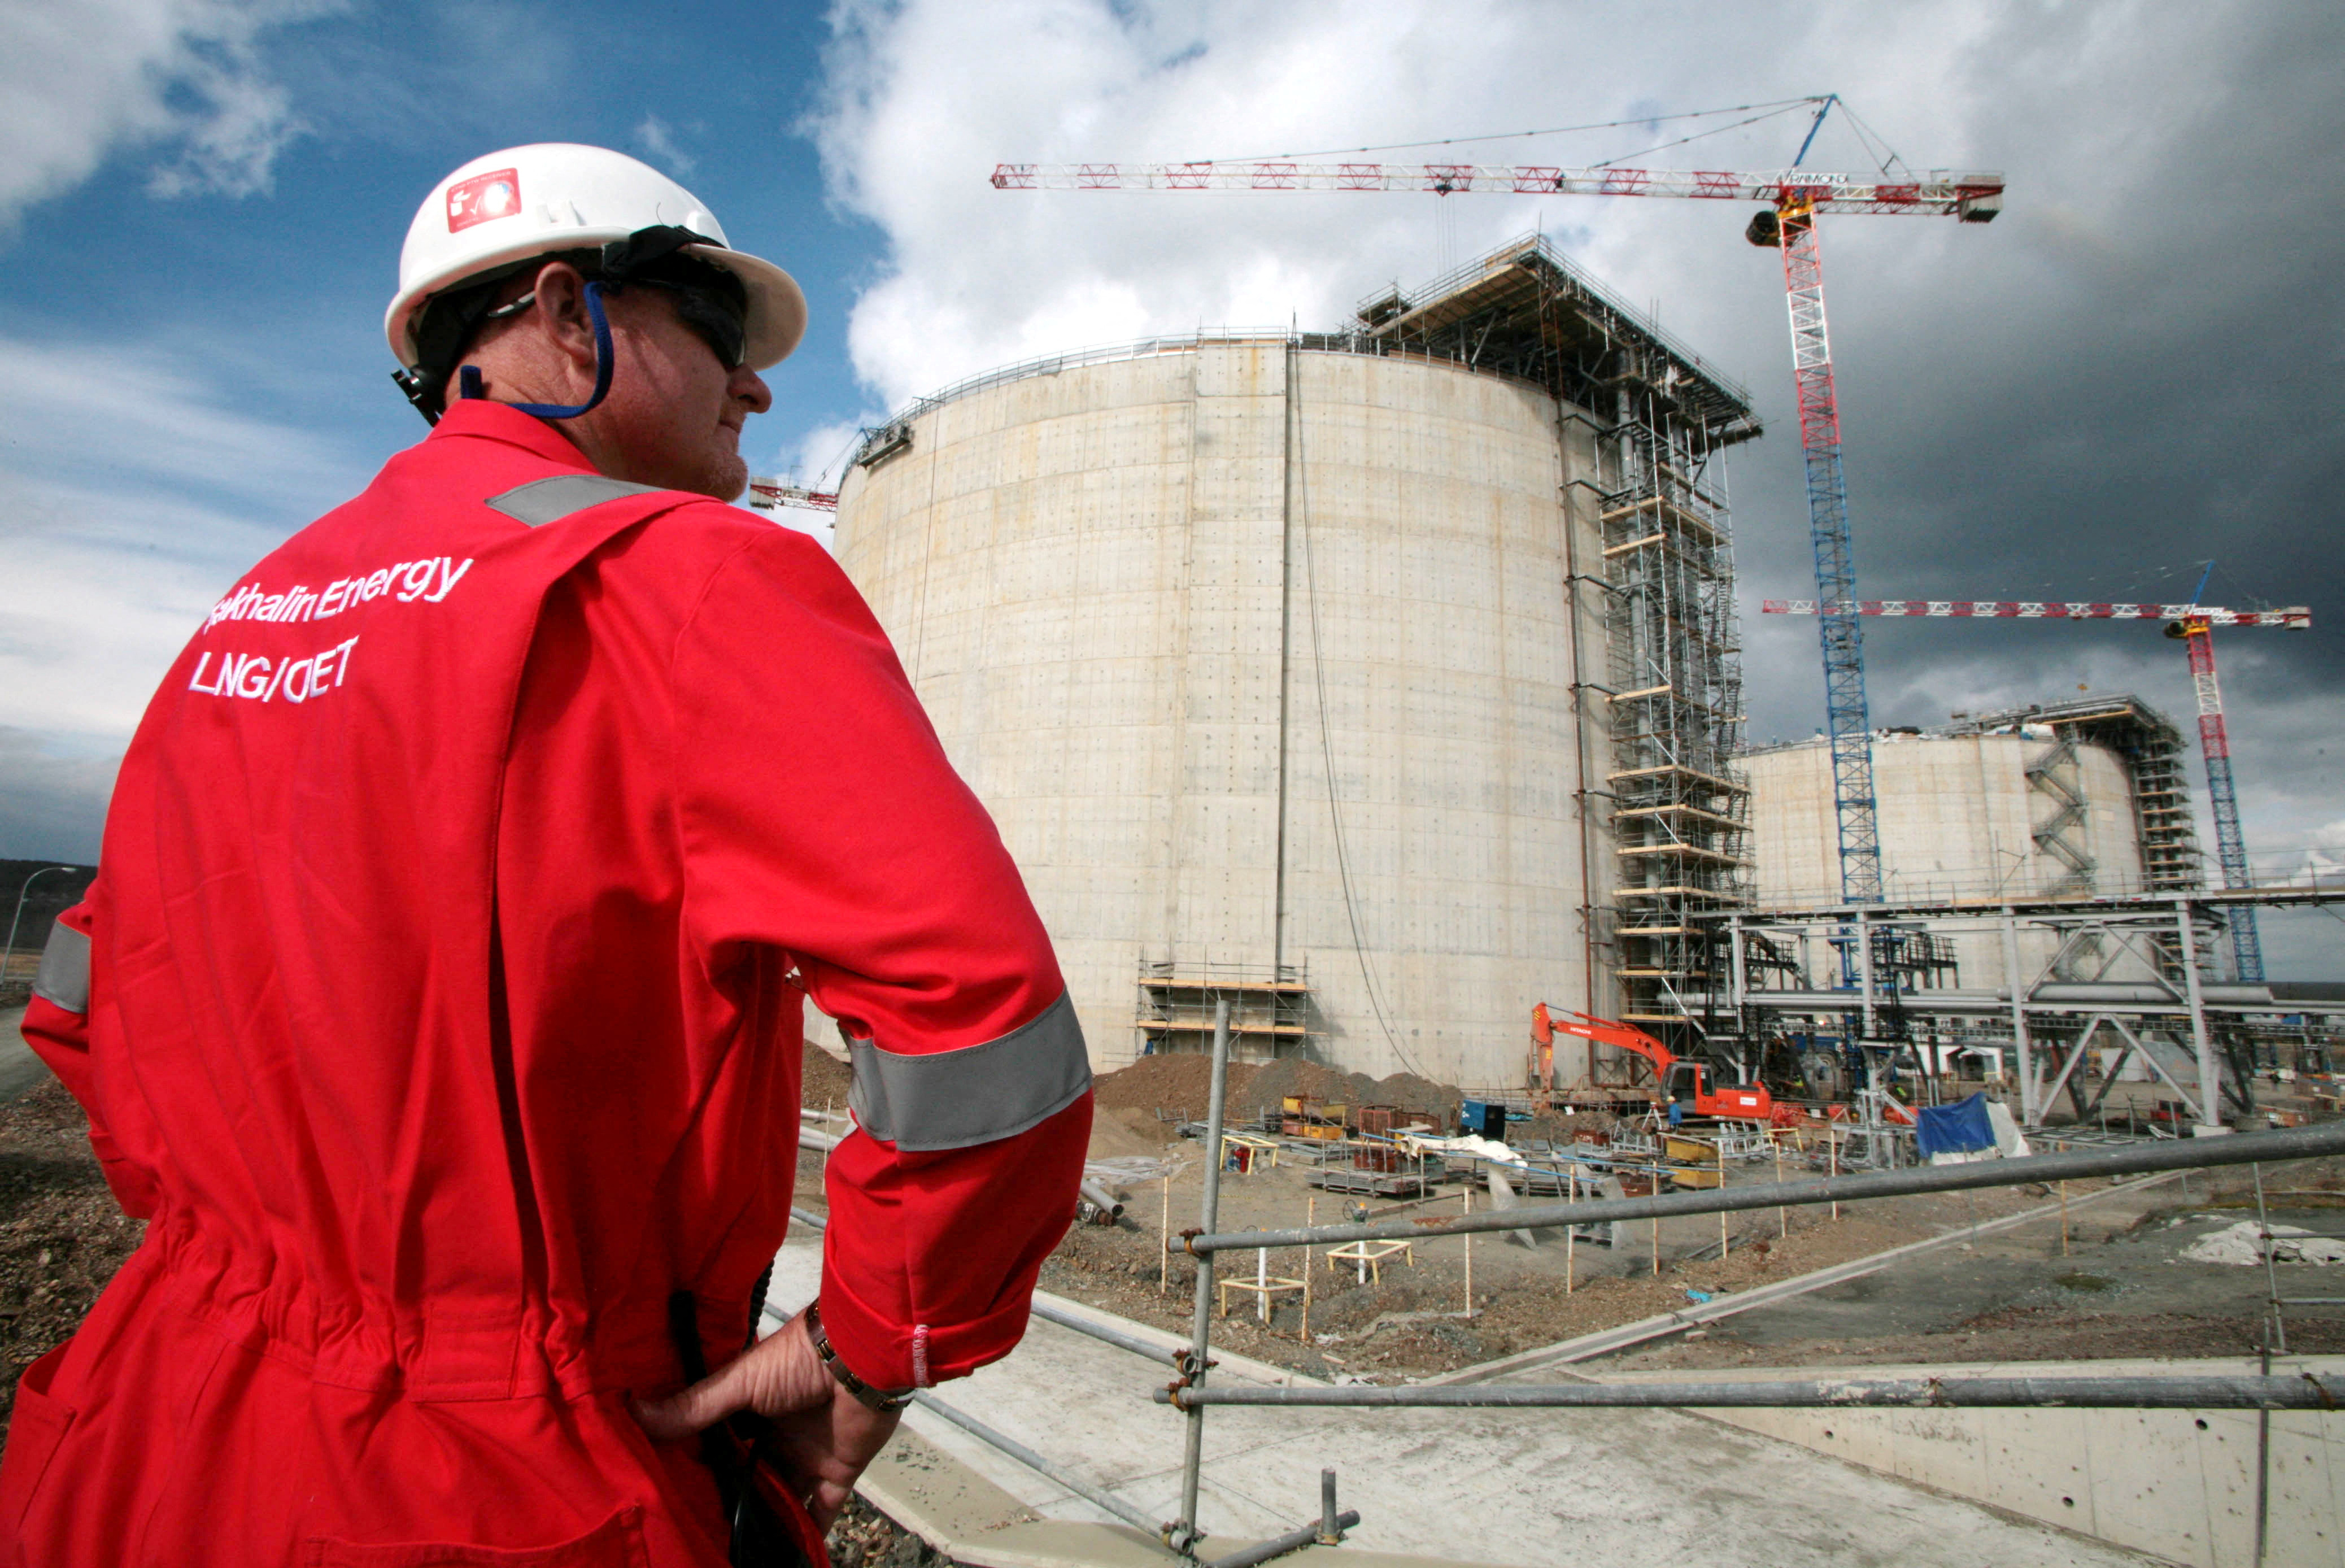 FILE PHOTO: An employee of Sakhalin Energy stands at the Sakhalin-2 project's liquefaction gas plant in Prigorodnoye